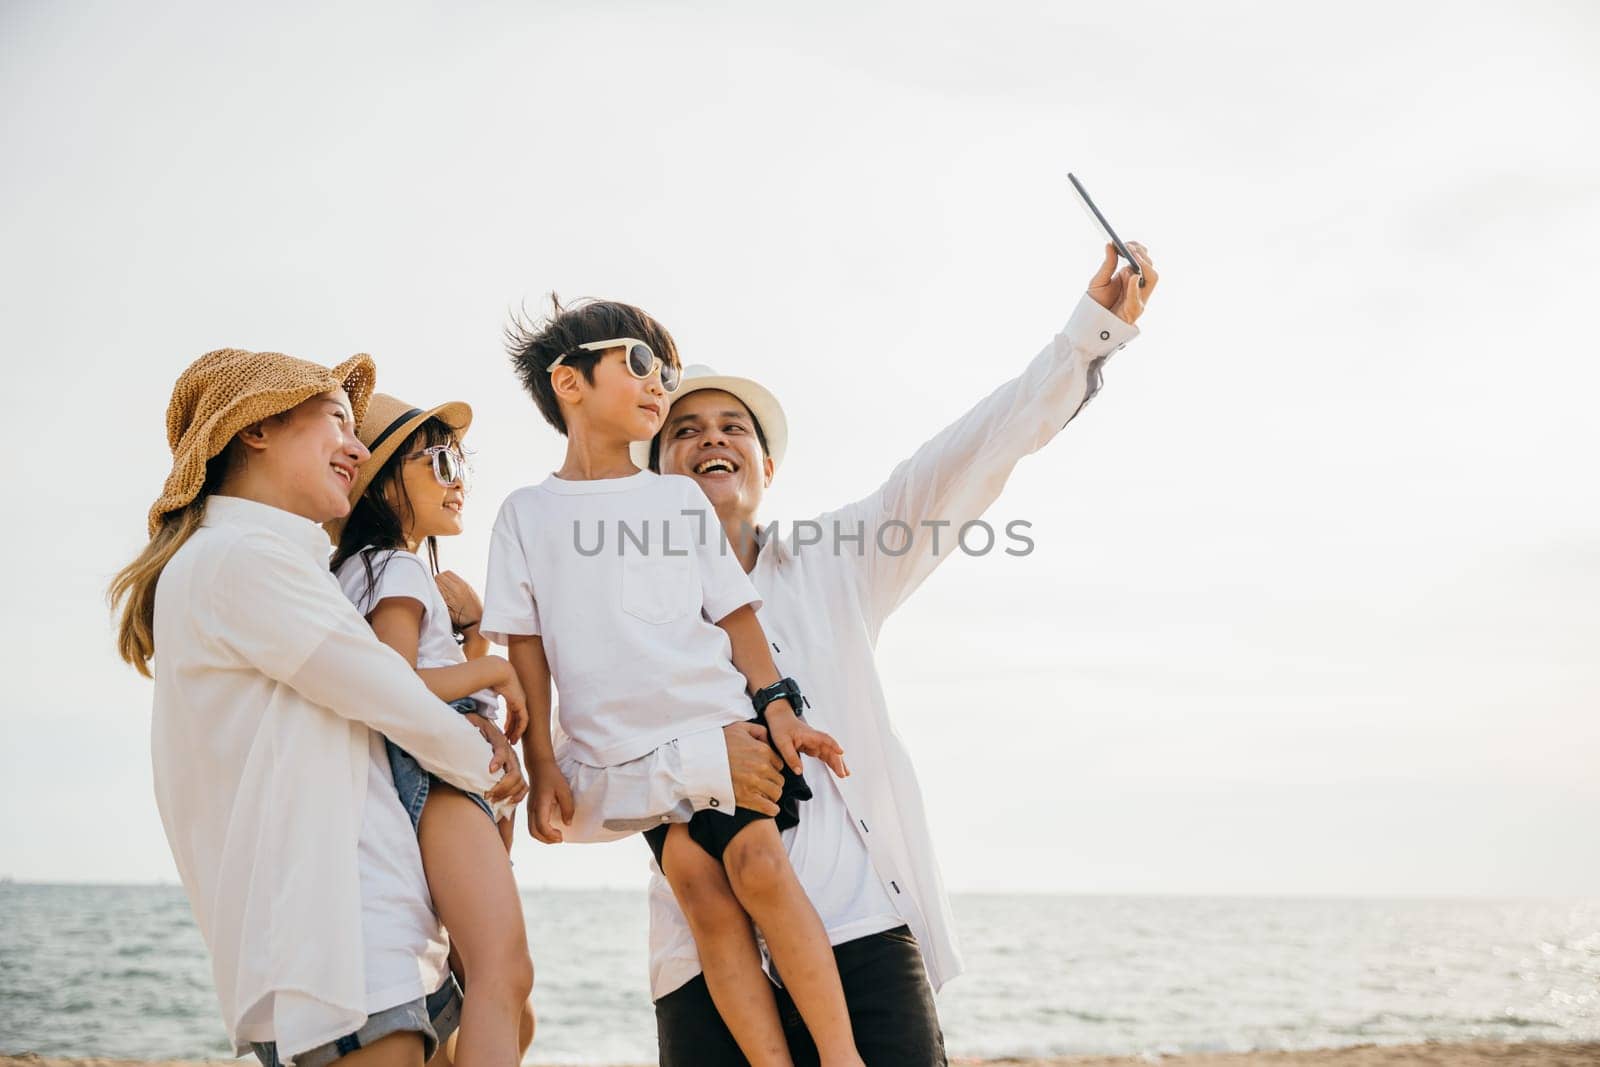 Beachside family fun as they take a cheerful selfie together near the sea. Laughter and joy unfold creating a playful and memorable moment of togetherness during a summer travel adventure.